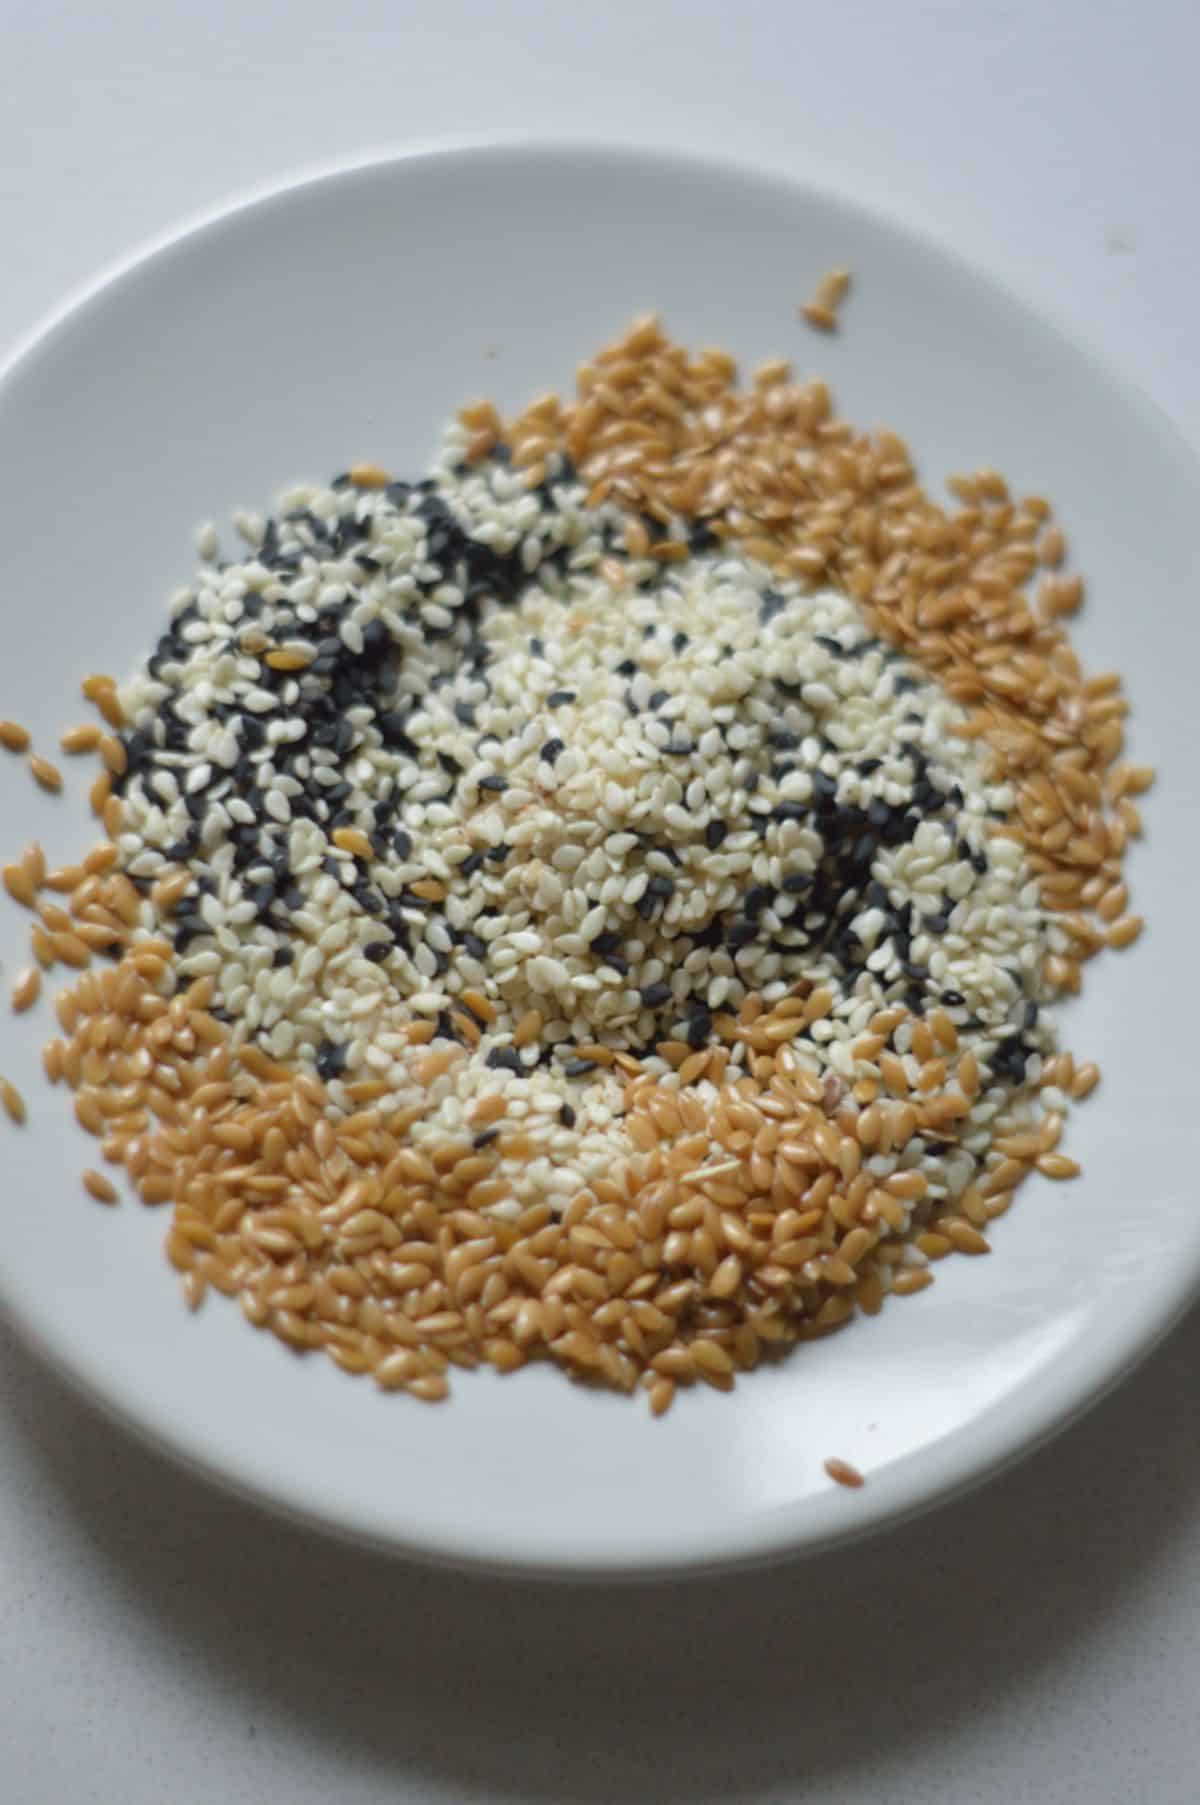 MIxed seeds on a white plate.